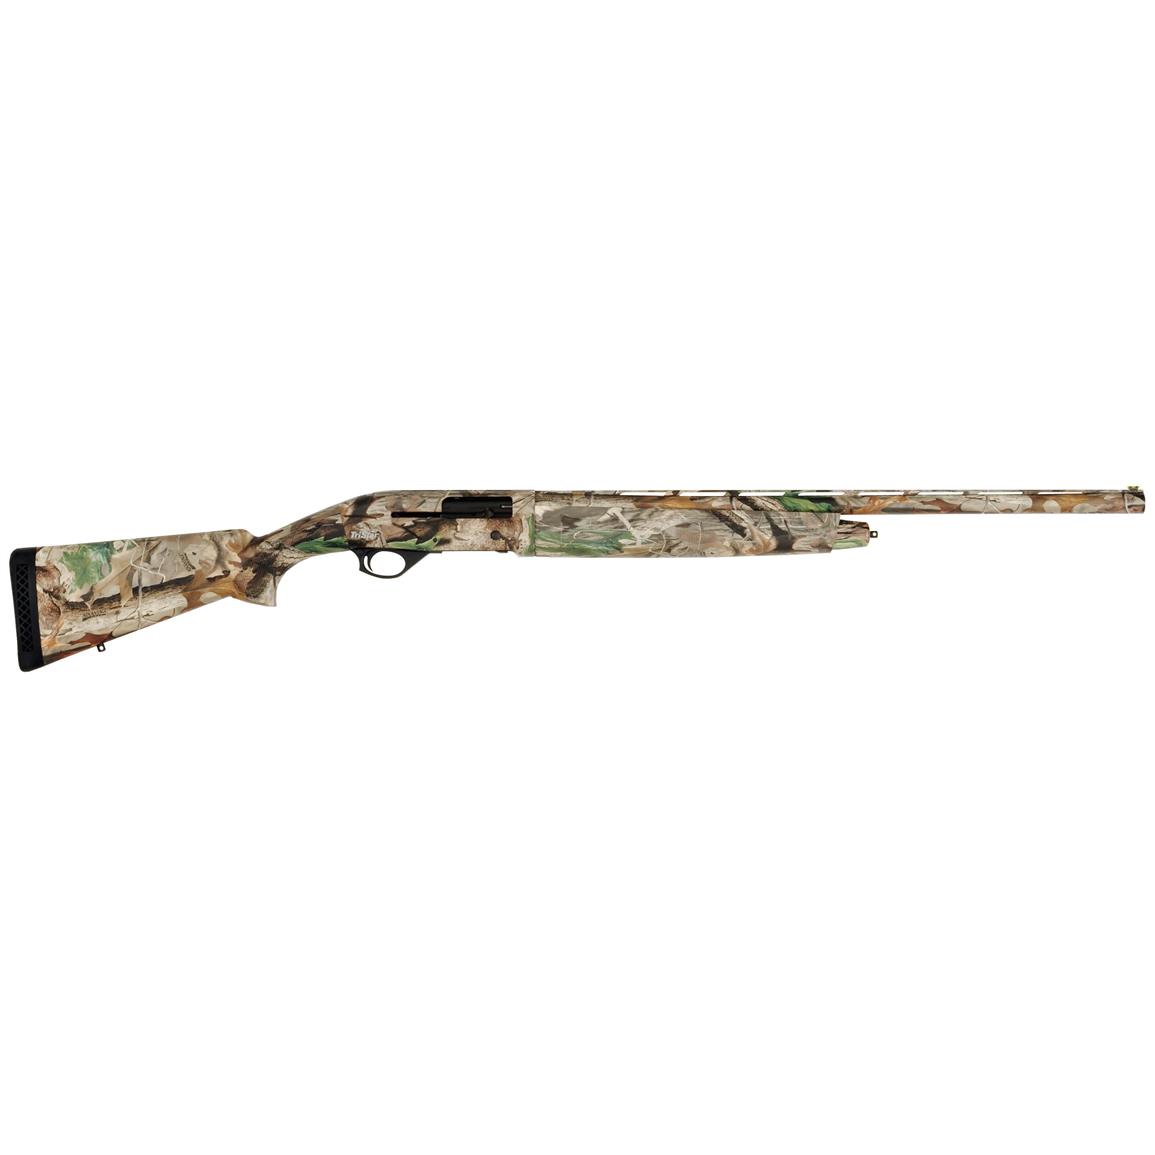 Youth TriStar Viper G2, Semi-Automatic, 20 Gauge, 24" Barrel, 5 1 Rounds